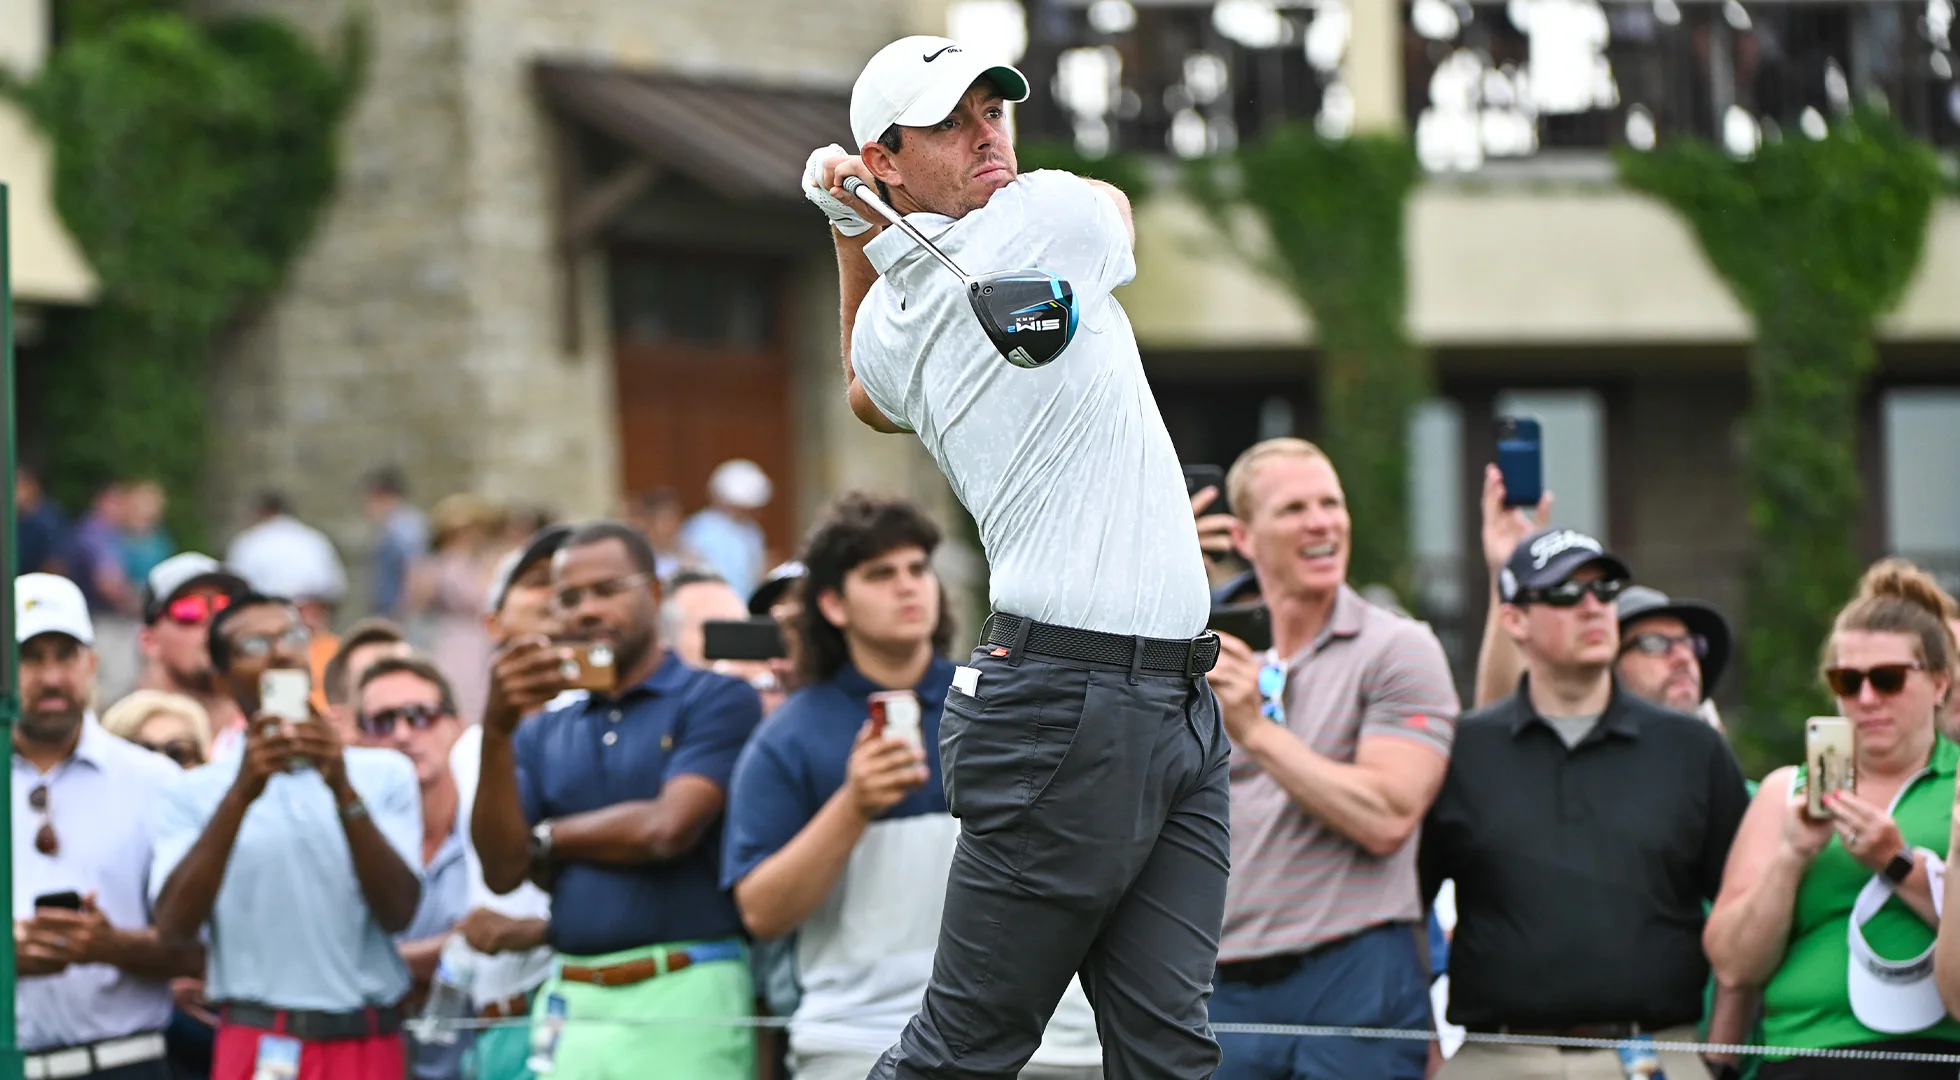 Rory Mcllroy expands on ‘personal reasons’ regarding withdrawing from the Memorial’s pro-am